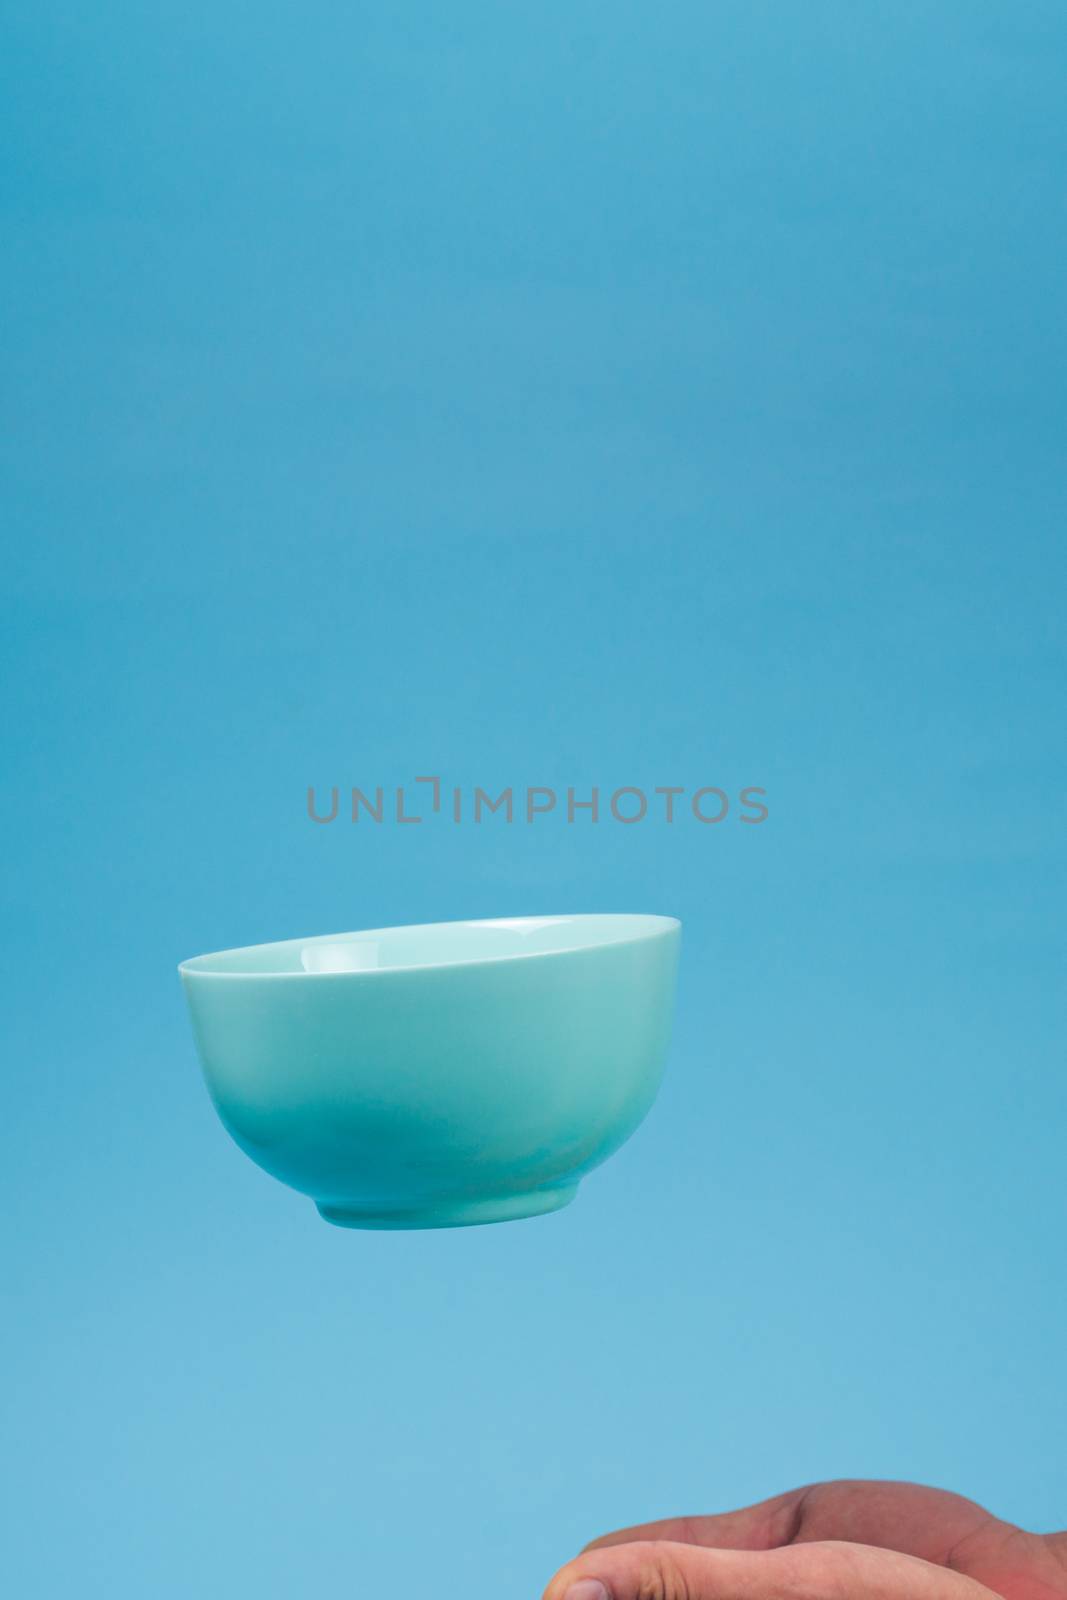 A blue ceramic mattle deep bowl for breakfast flying under male hands on blue background. Ideal photo for levitation of food and fruits or nuts.